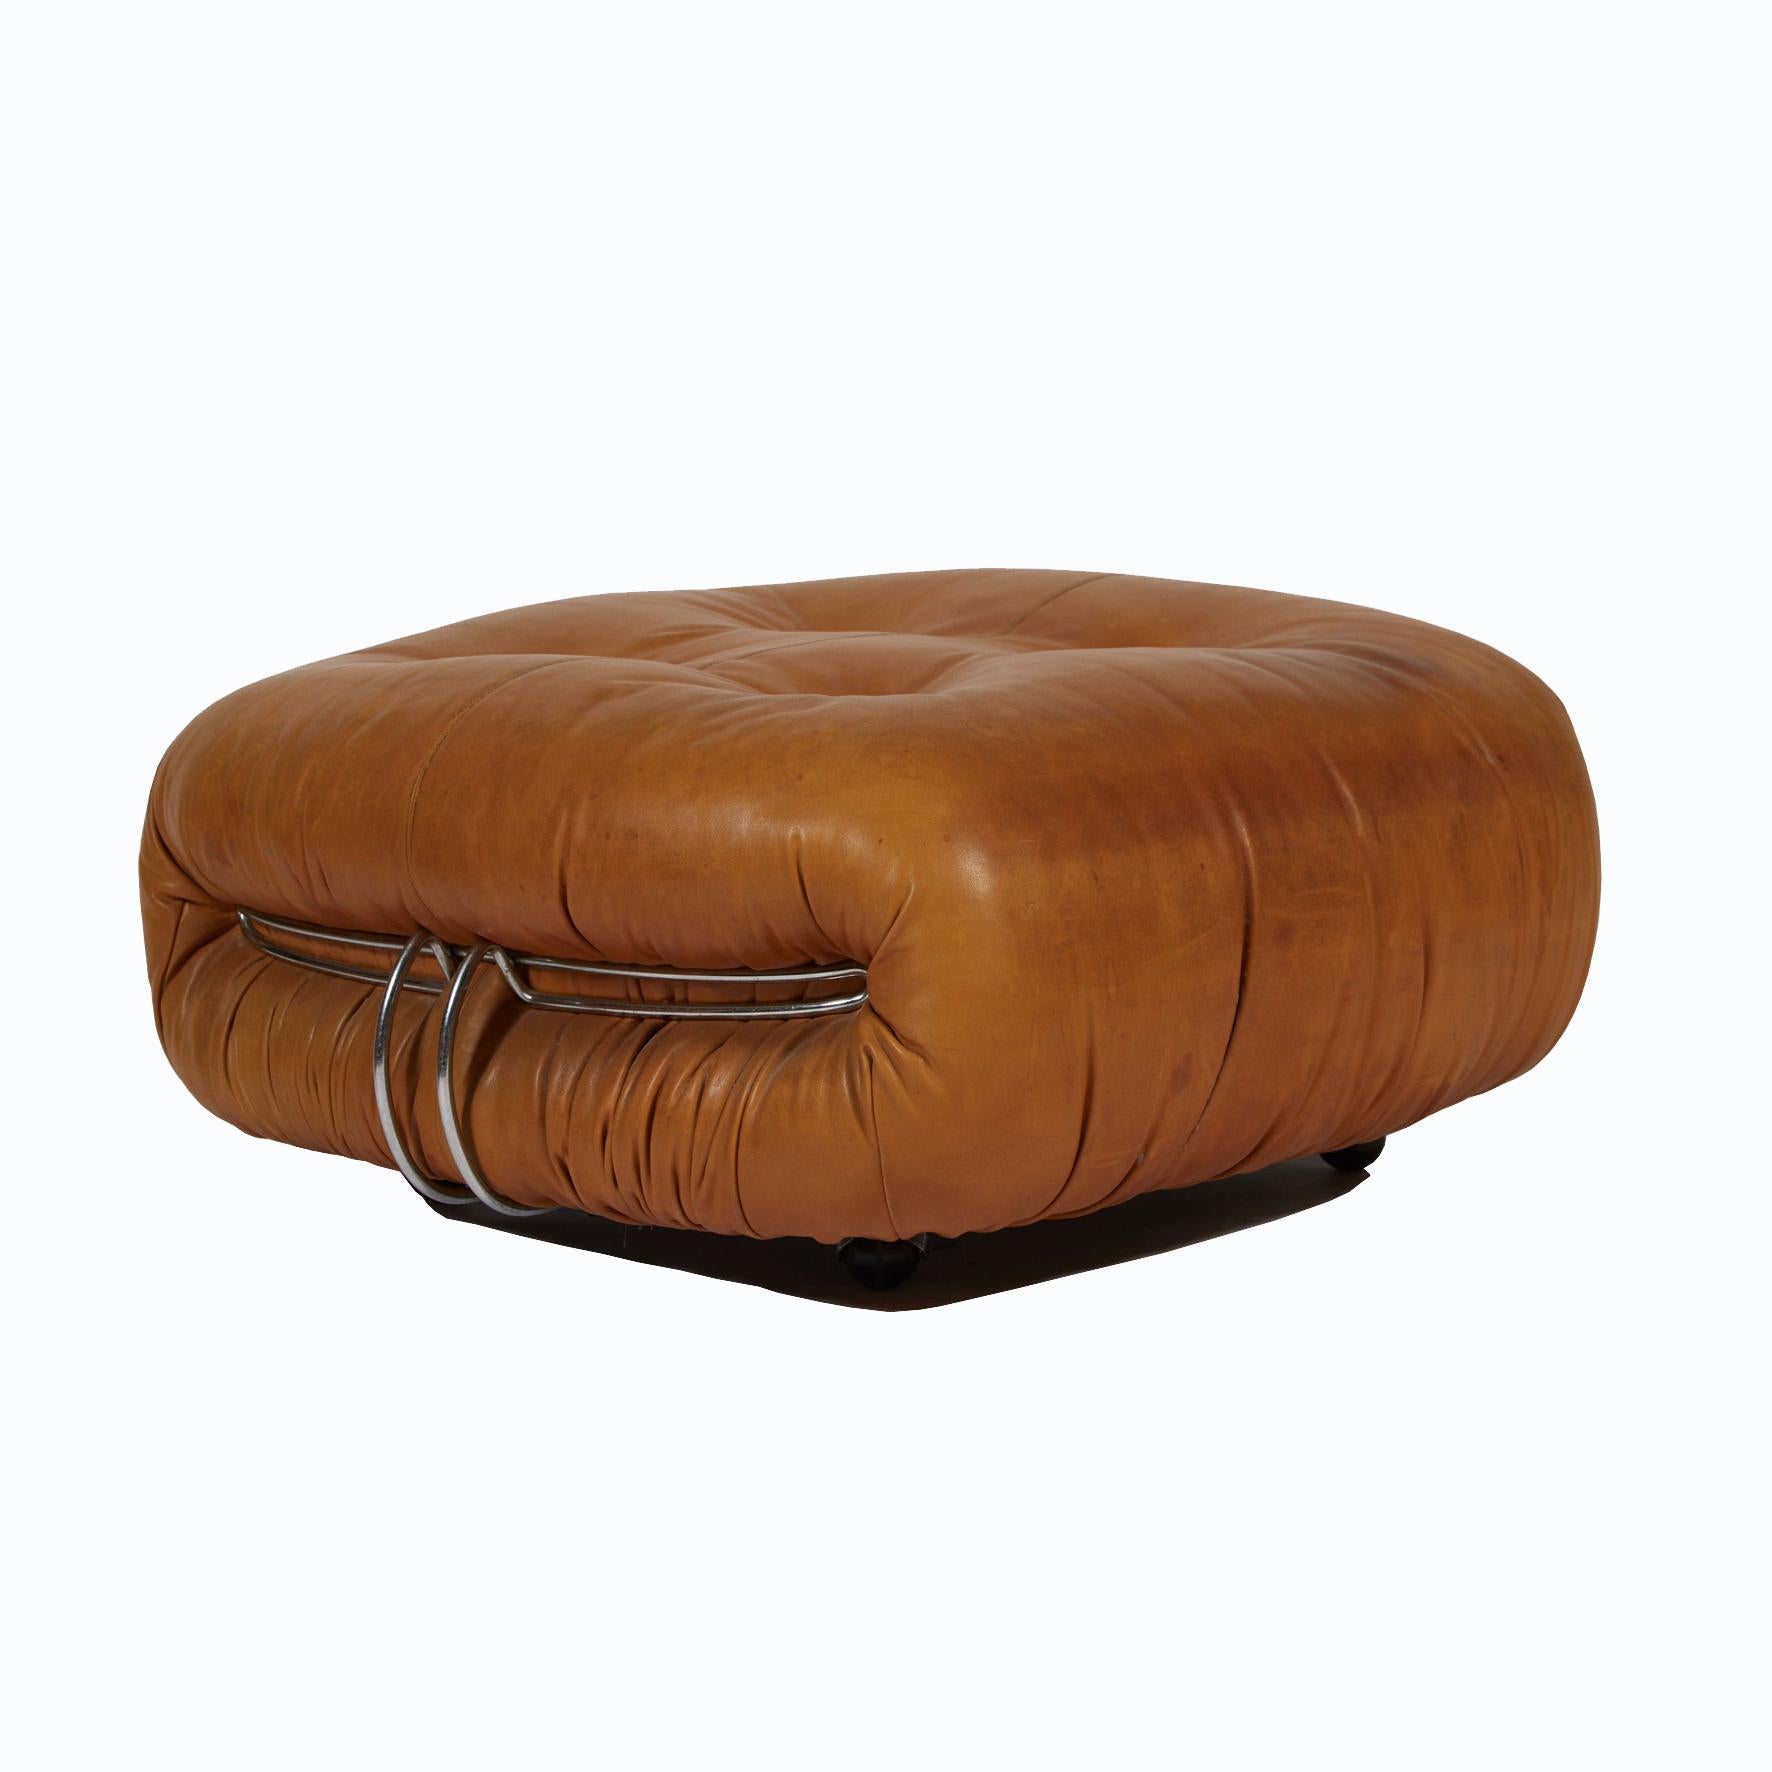 Afra & Tobia Scarpa (1935-2011 & 1935-)

Soriana

A very rare and exceptional ottoman.
Covered with its original brown leather, beautifully patinated and in very good condition.
Produced by Cassina.
Italy, circa 1970.

Note
This is a rare